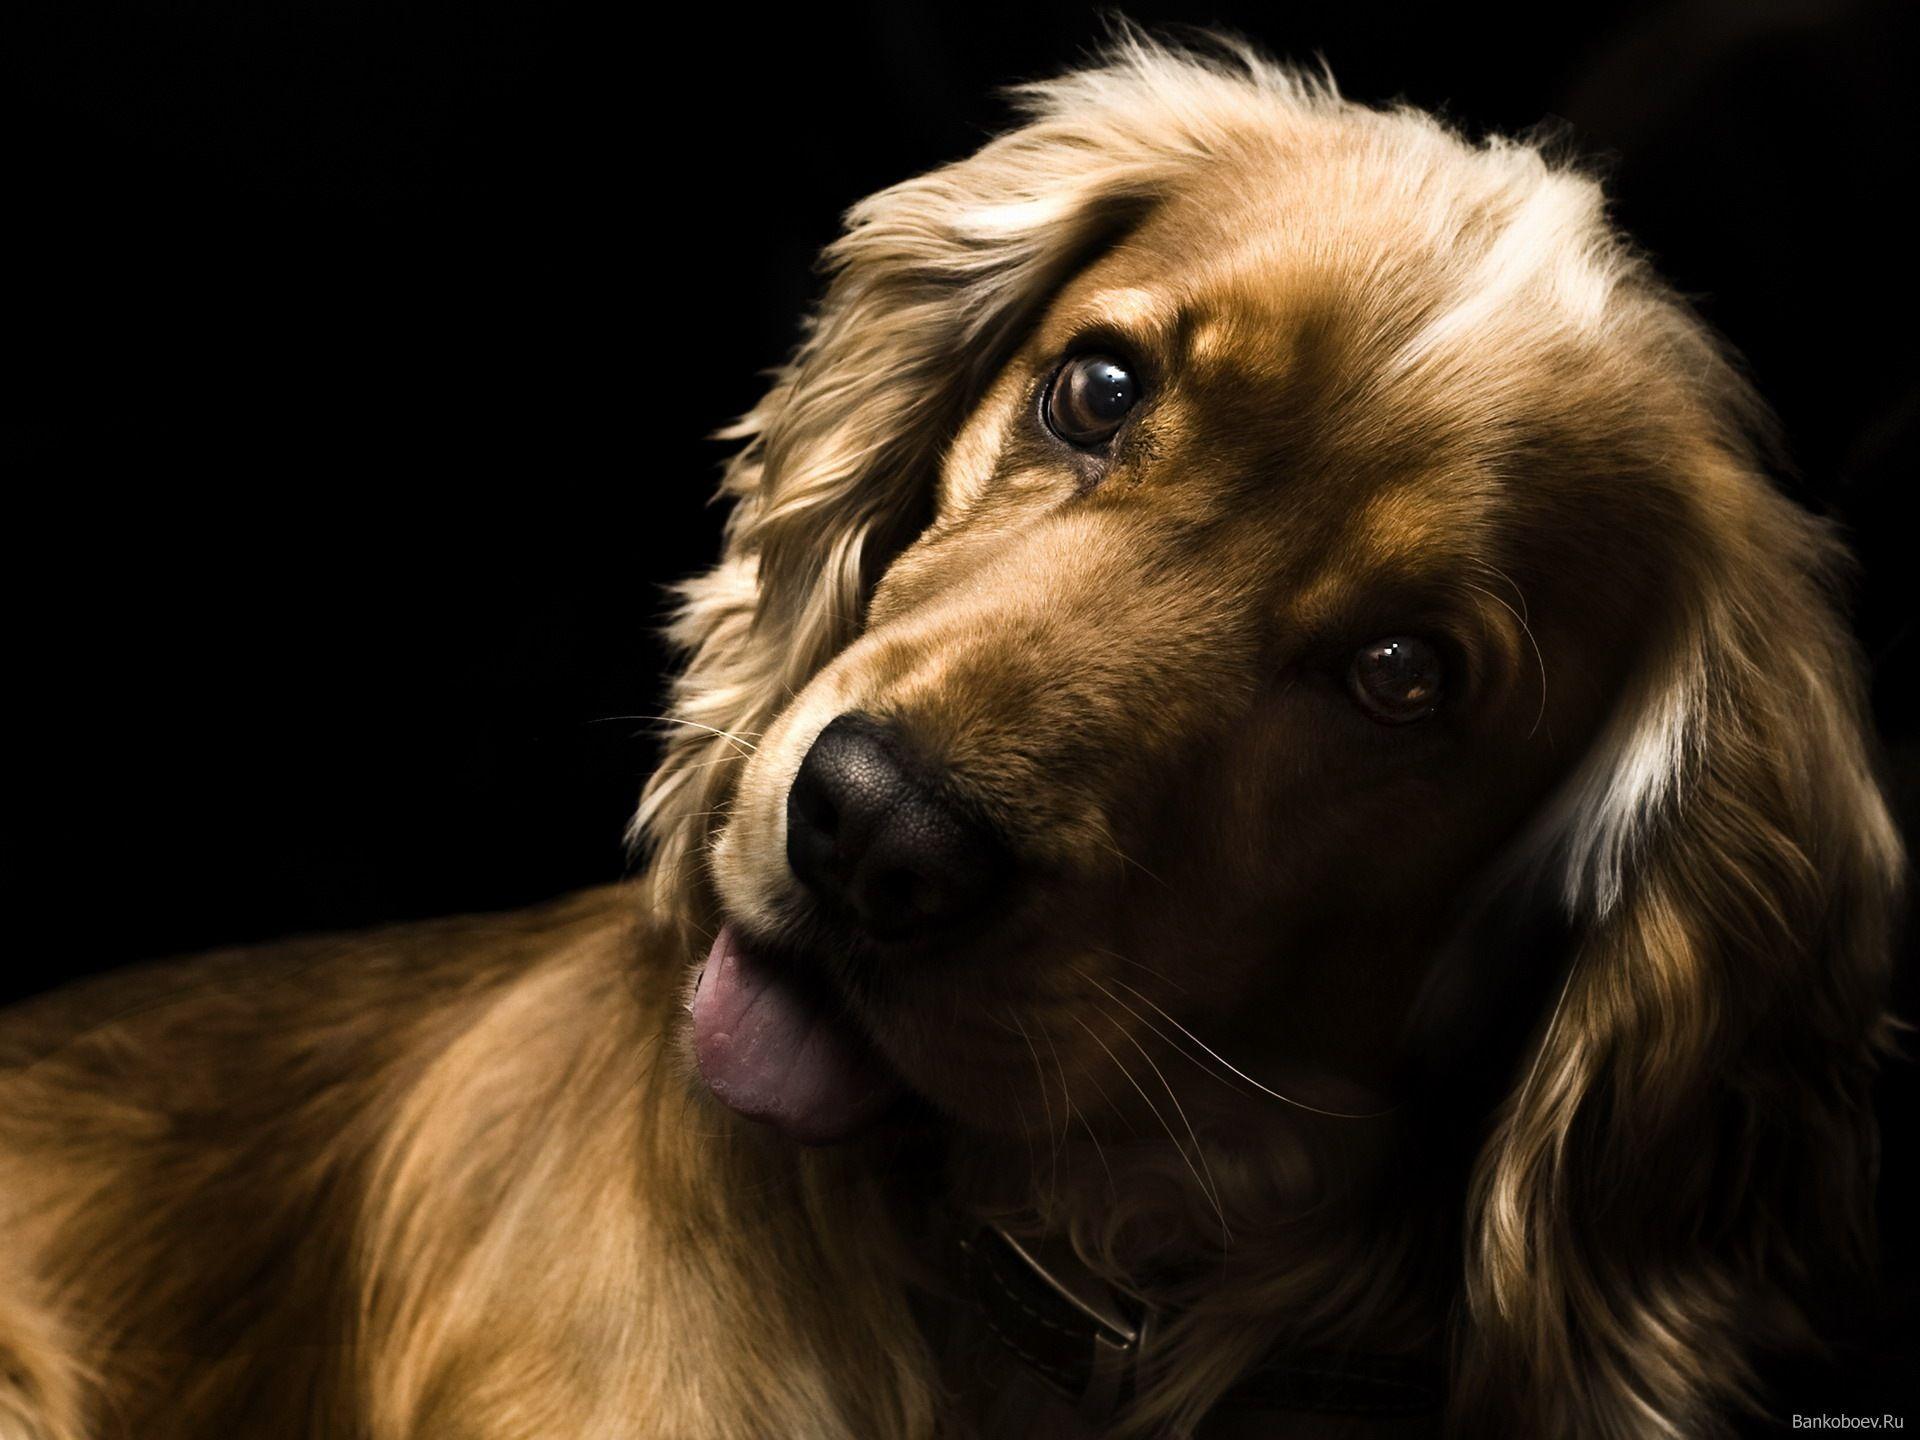 Surprised English Cocker Spaniel wallpapers and image